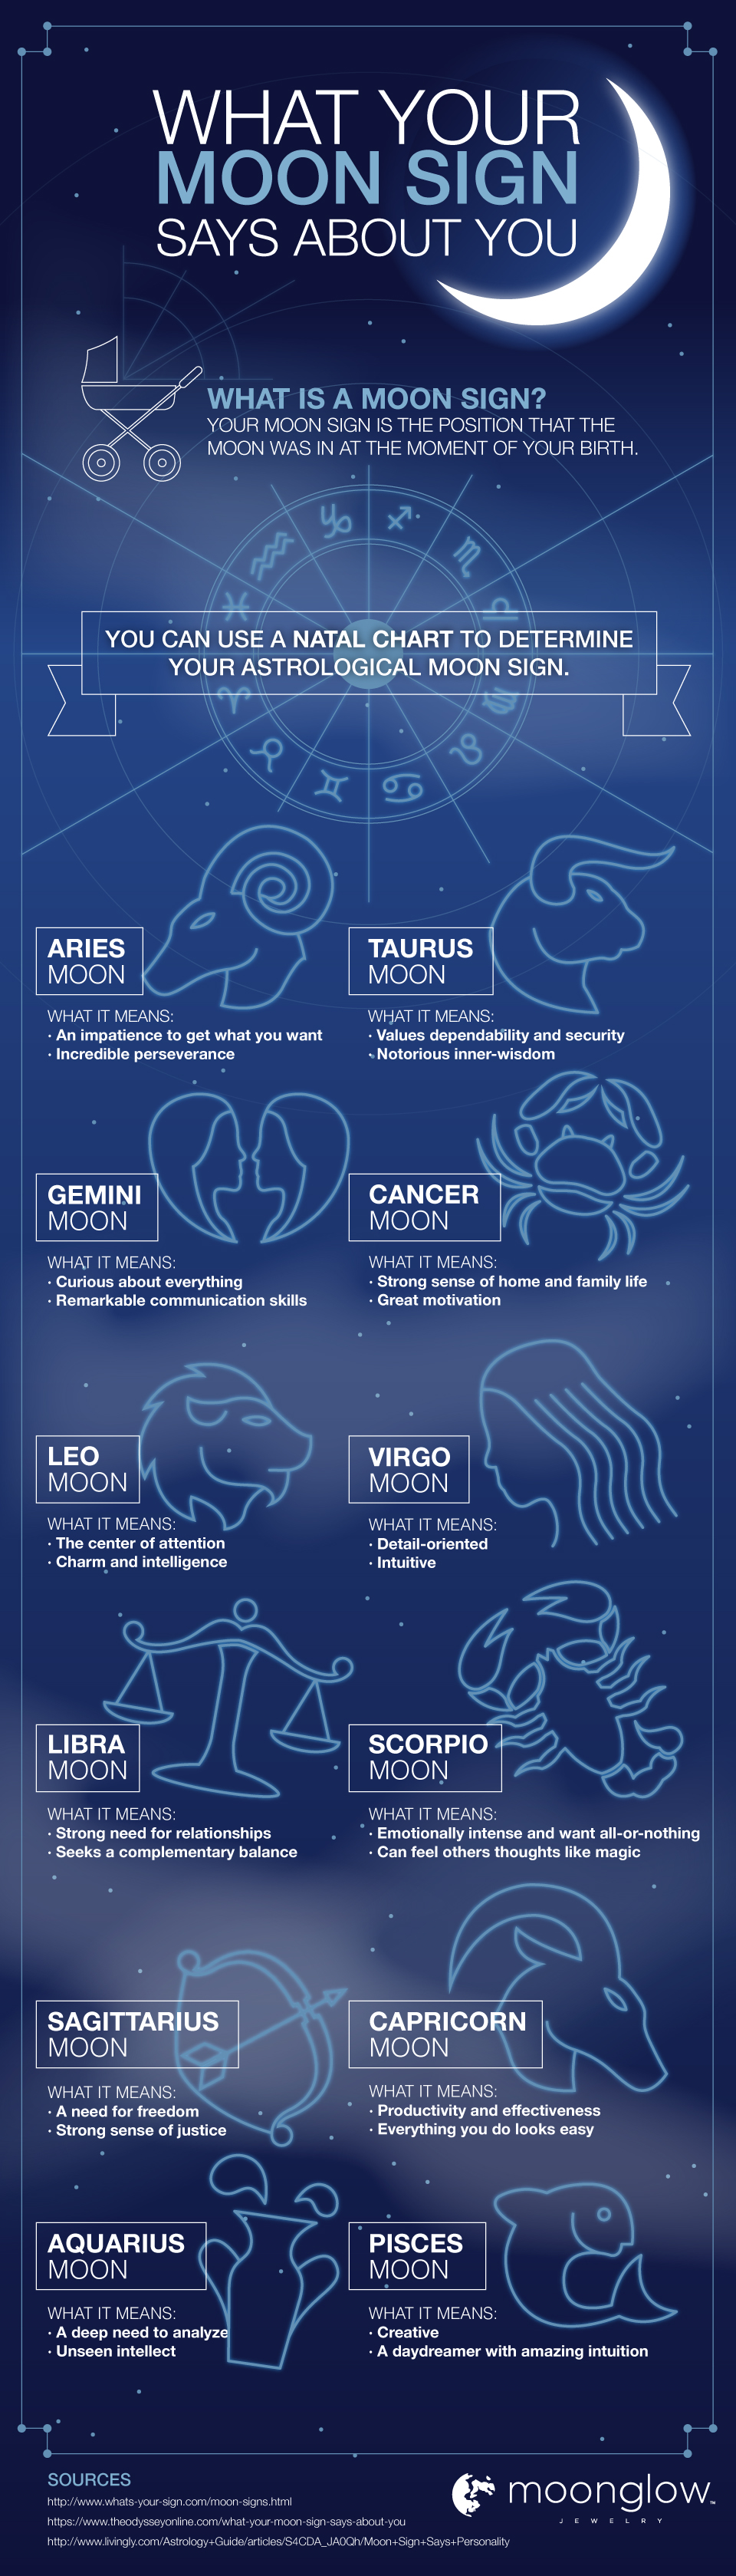 How do you know your Sun and moon signs?